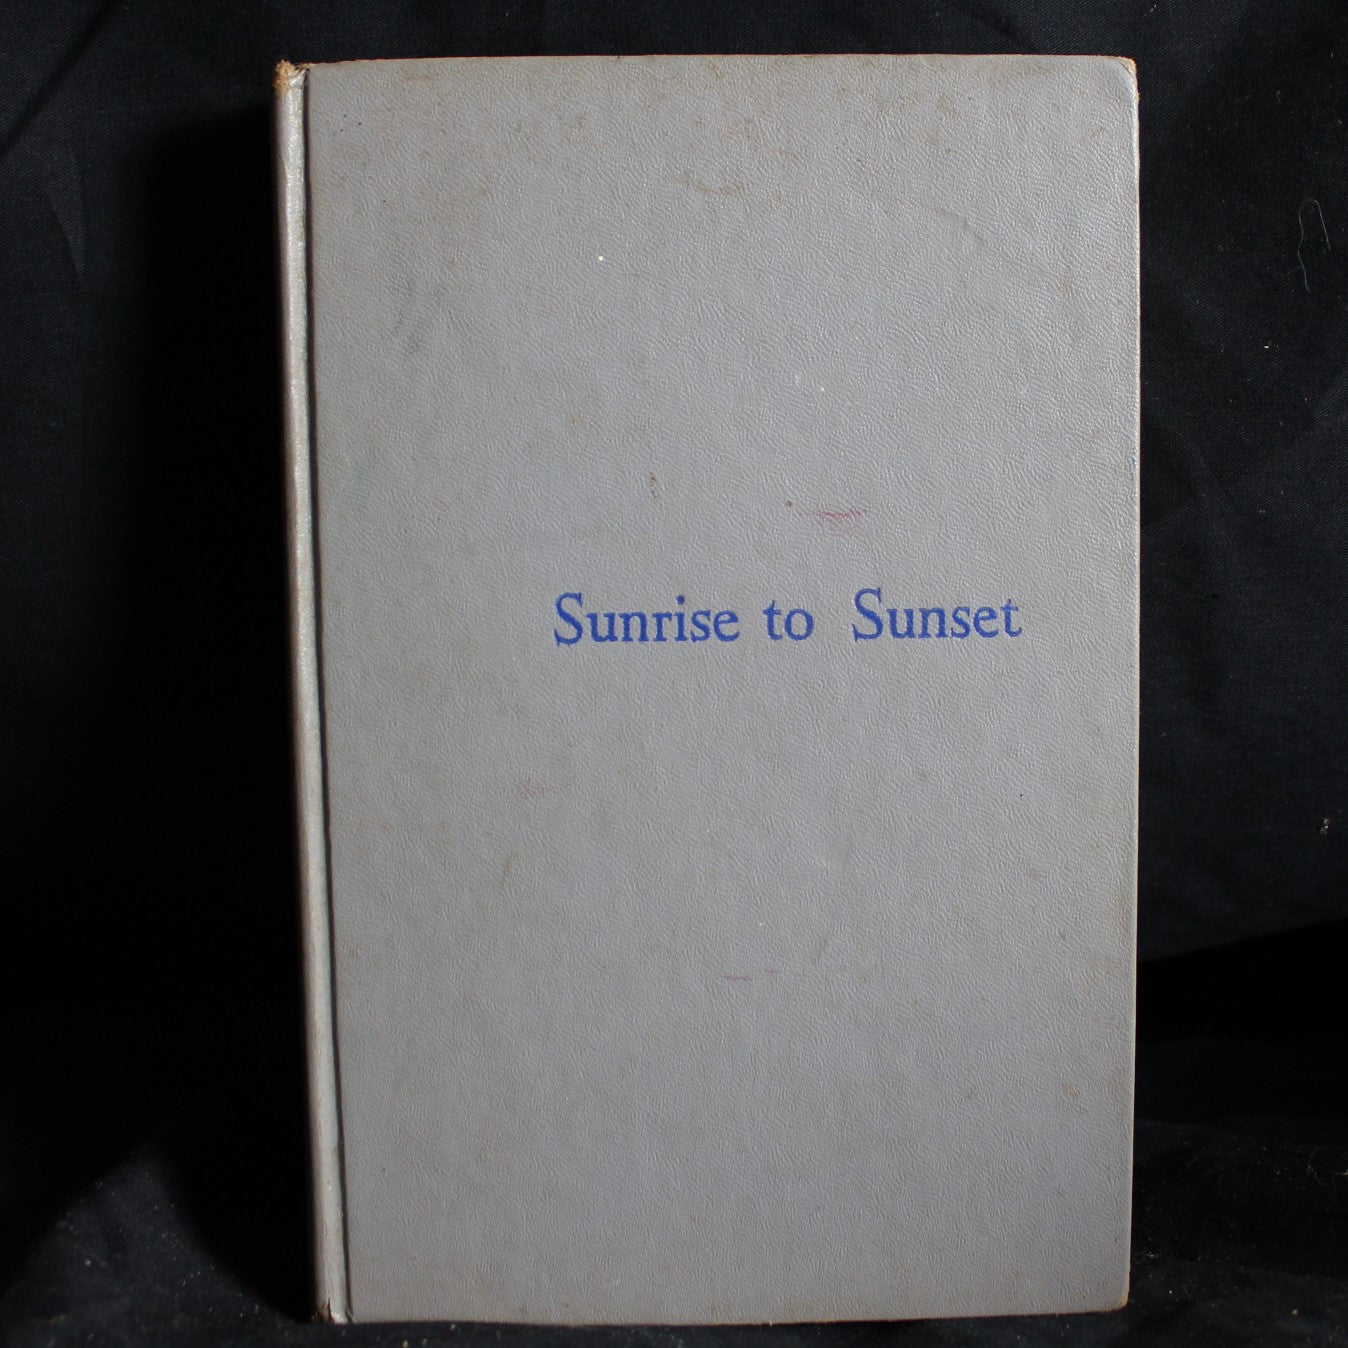 Vintage Hardcover First Printing Sunrise to Sunset by Samuel Hopkins Adams, 1950